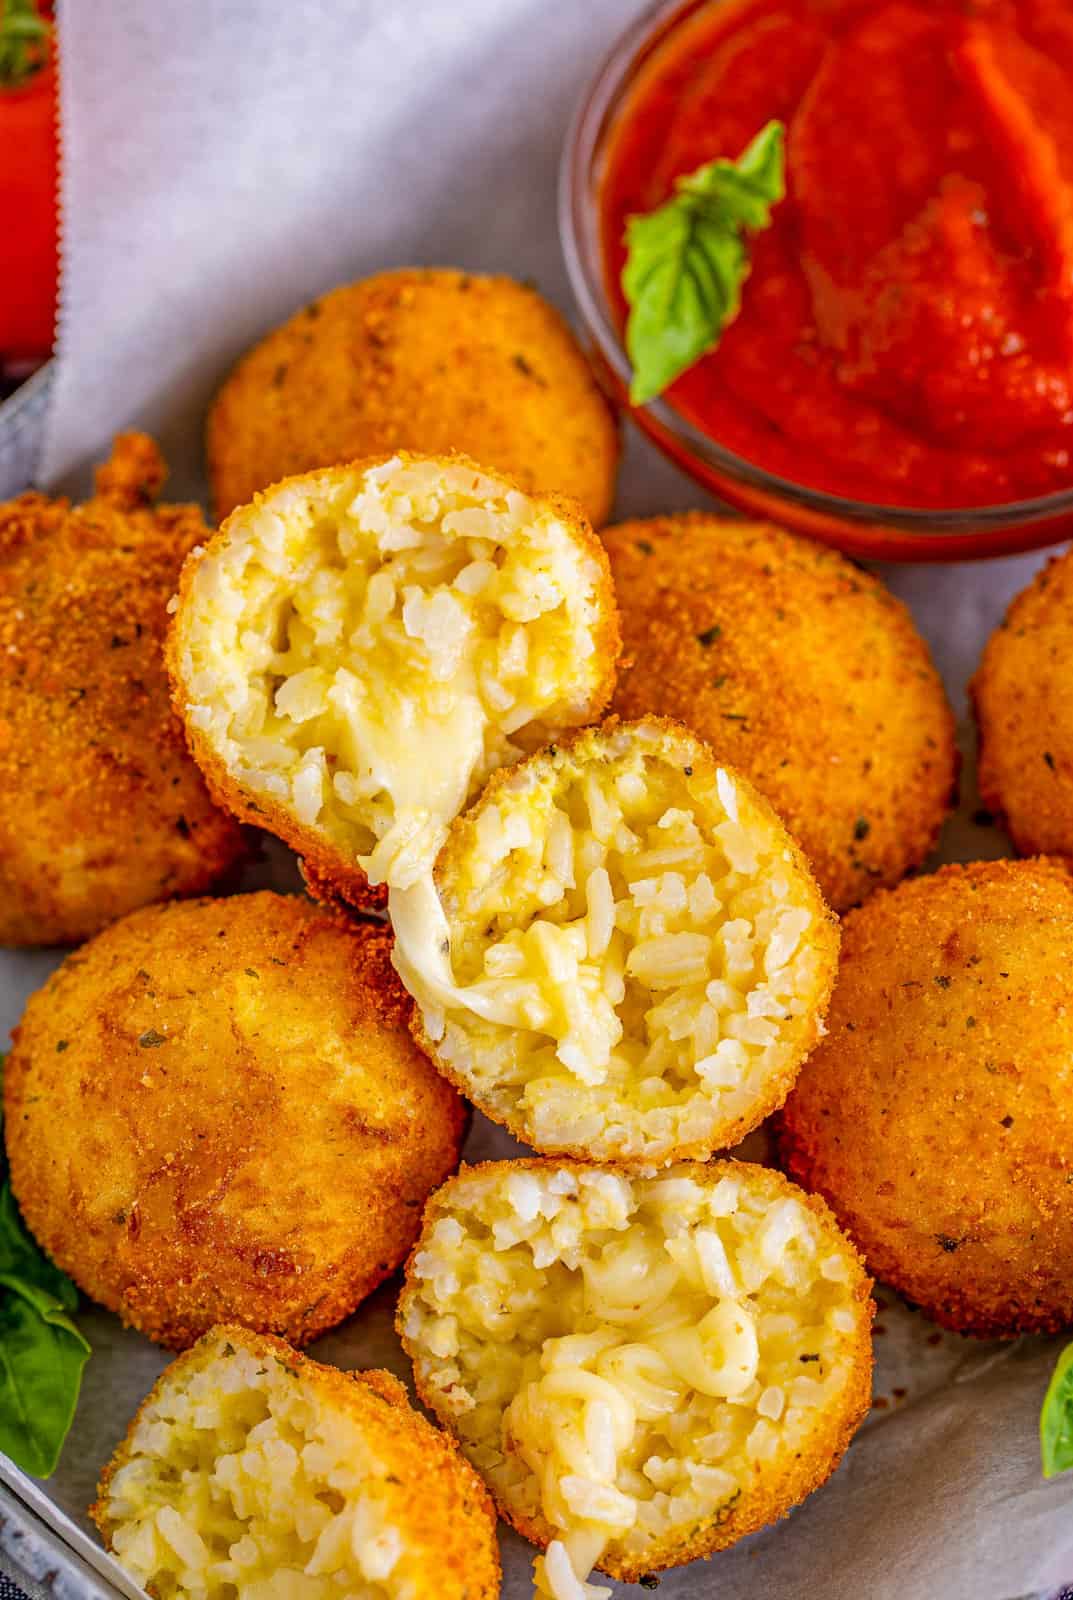 Arancini stacked on platter with one open showing cheesy inside.